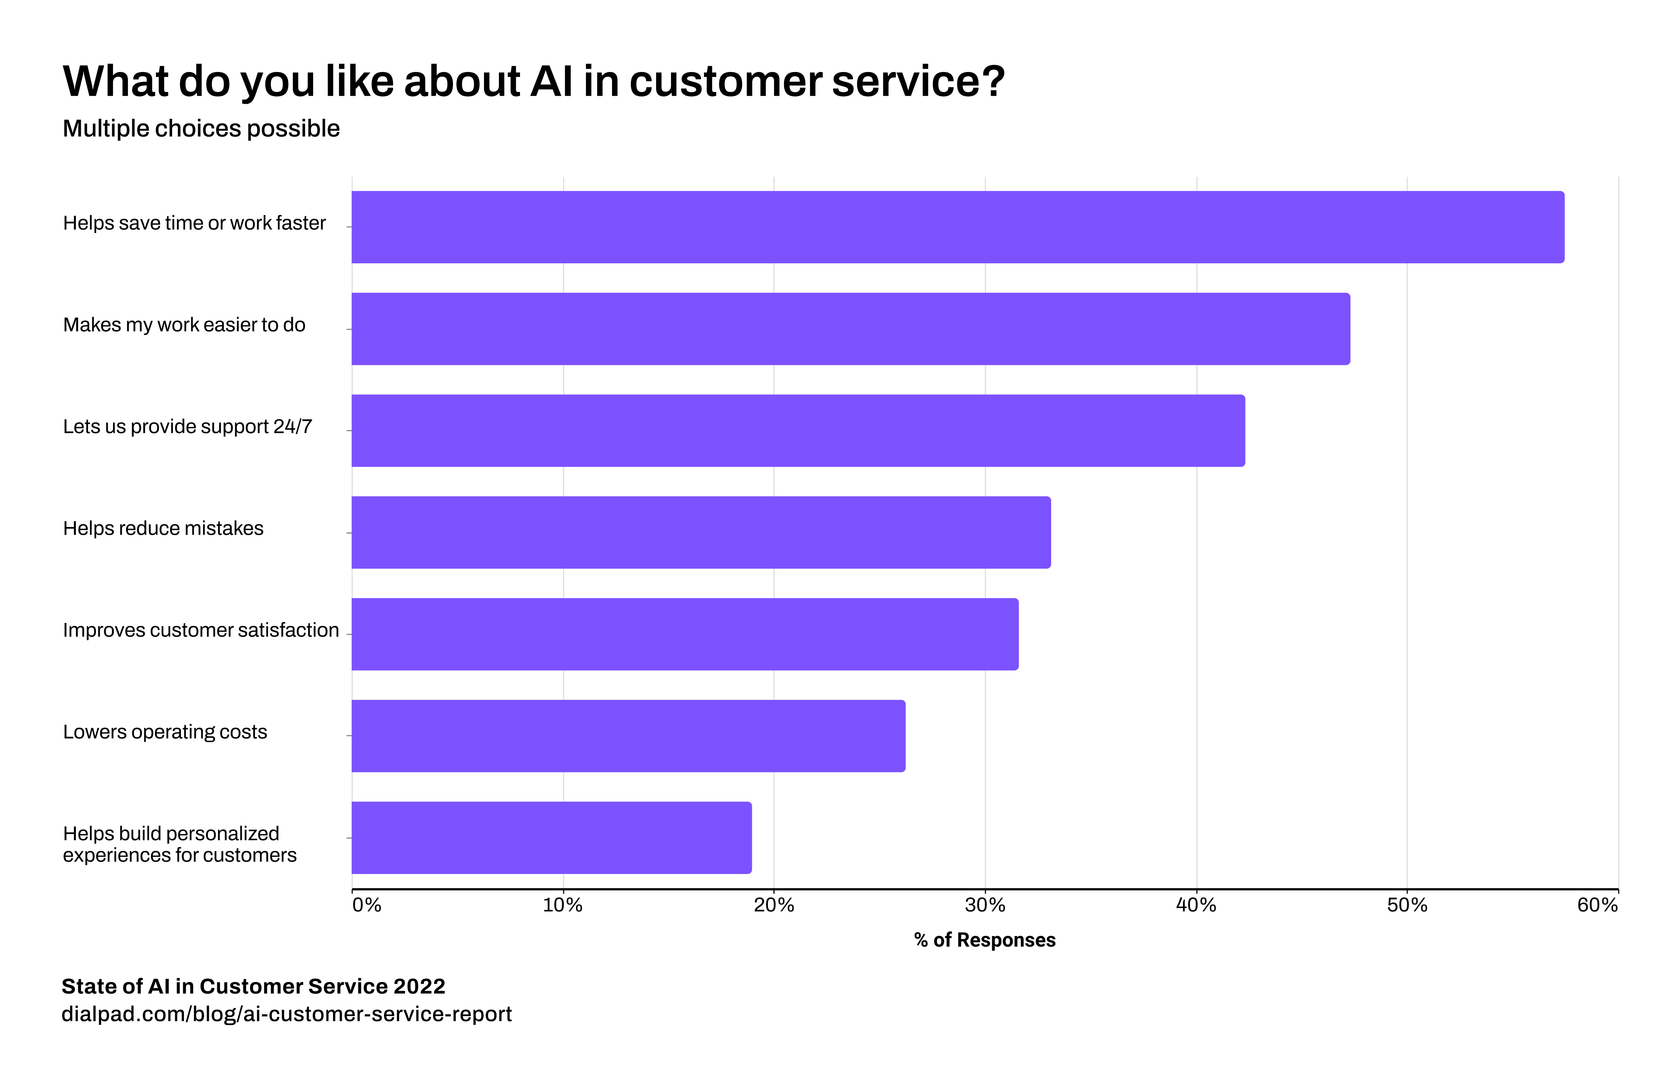 What do you like about AI in customer service